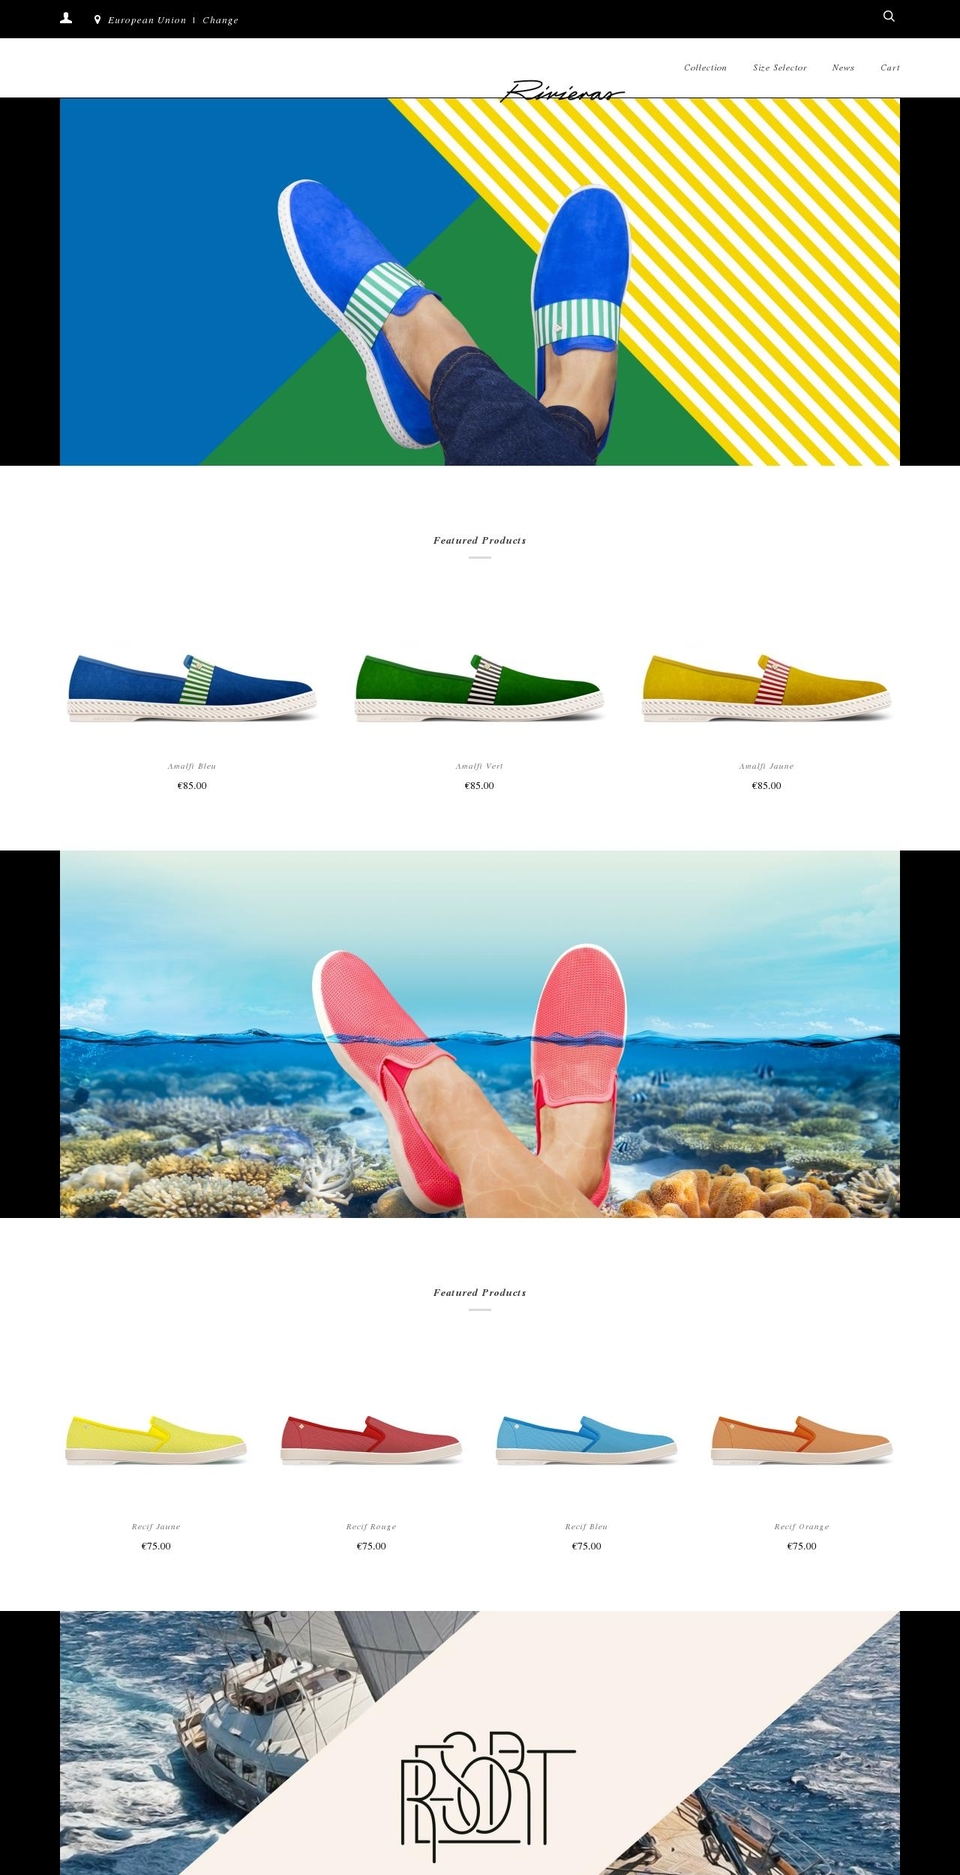 Rivieras [Plus]-TH-July-30-2018 Shopify theme site example rivieras-shoes.cz